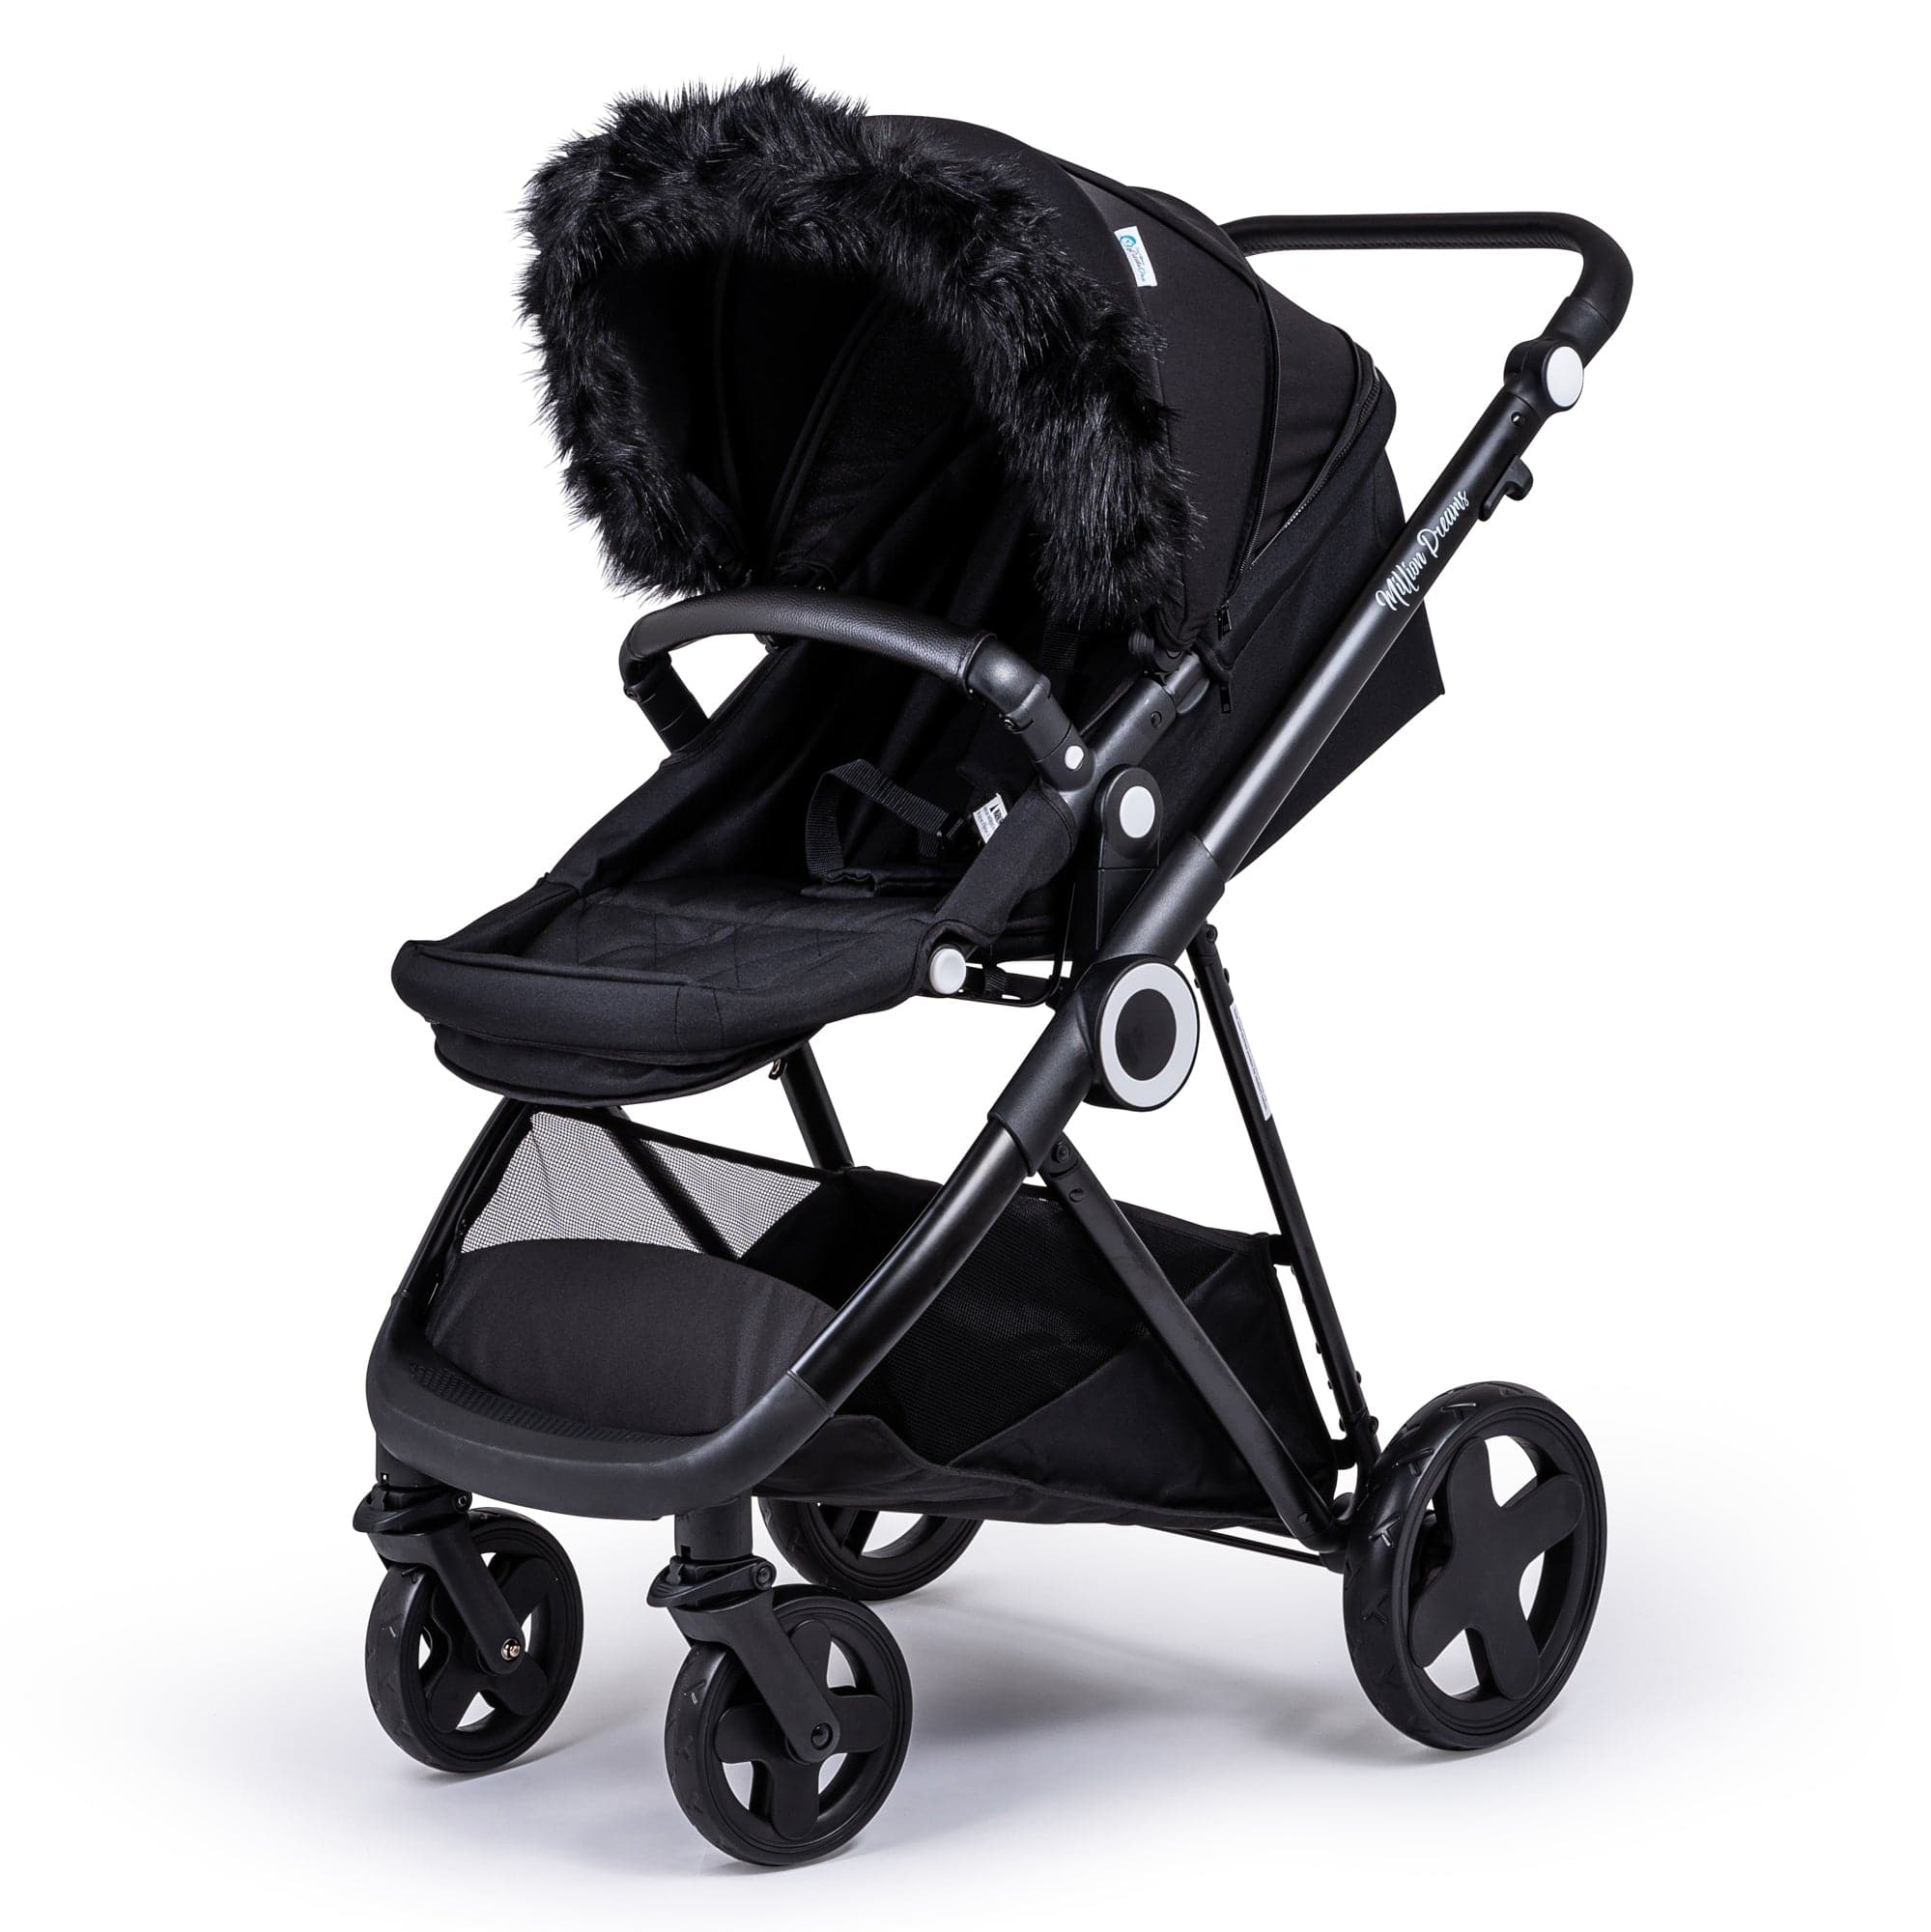 Pram Fur Hood Trim Attachment For Pushchair Compatible with Baby Elegance - Black / Fits All Models | For Your Little One